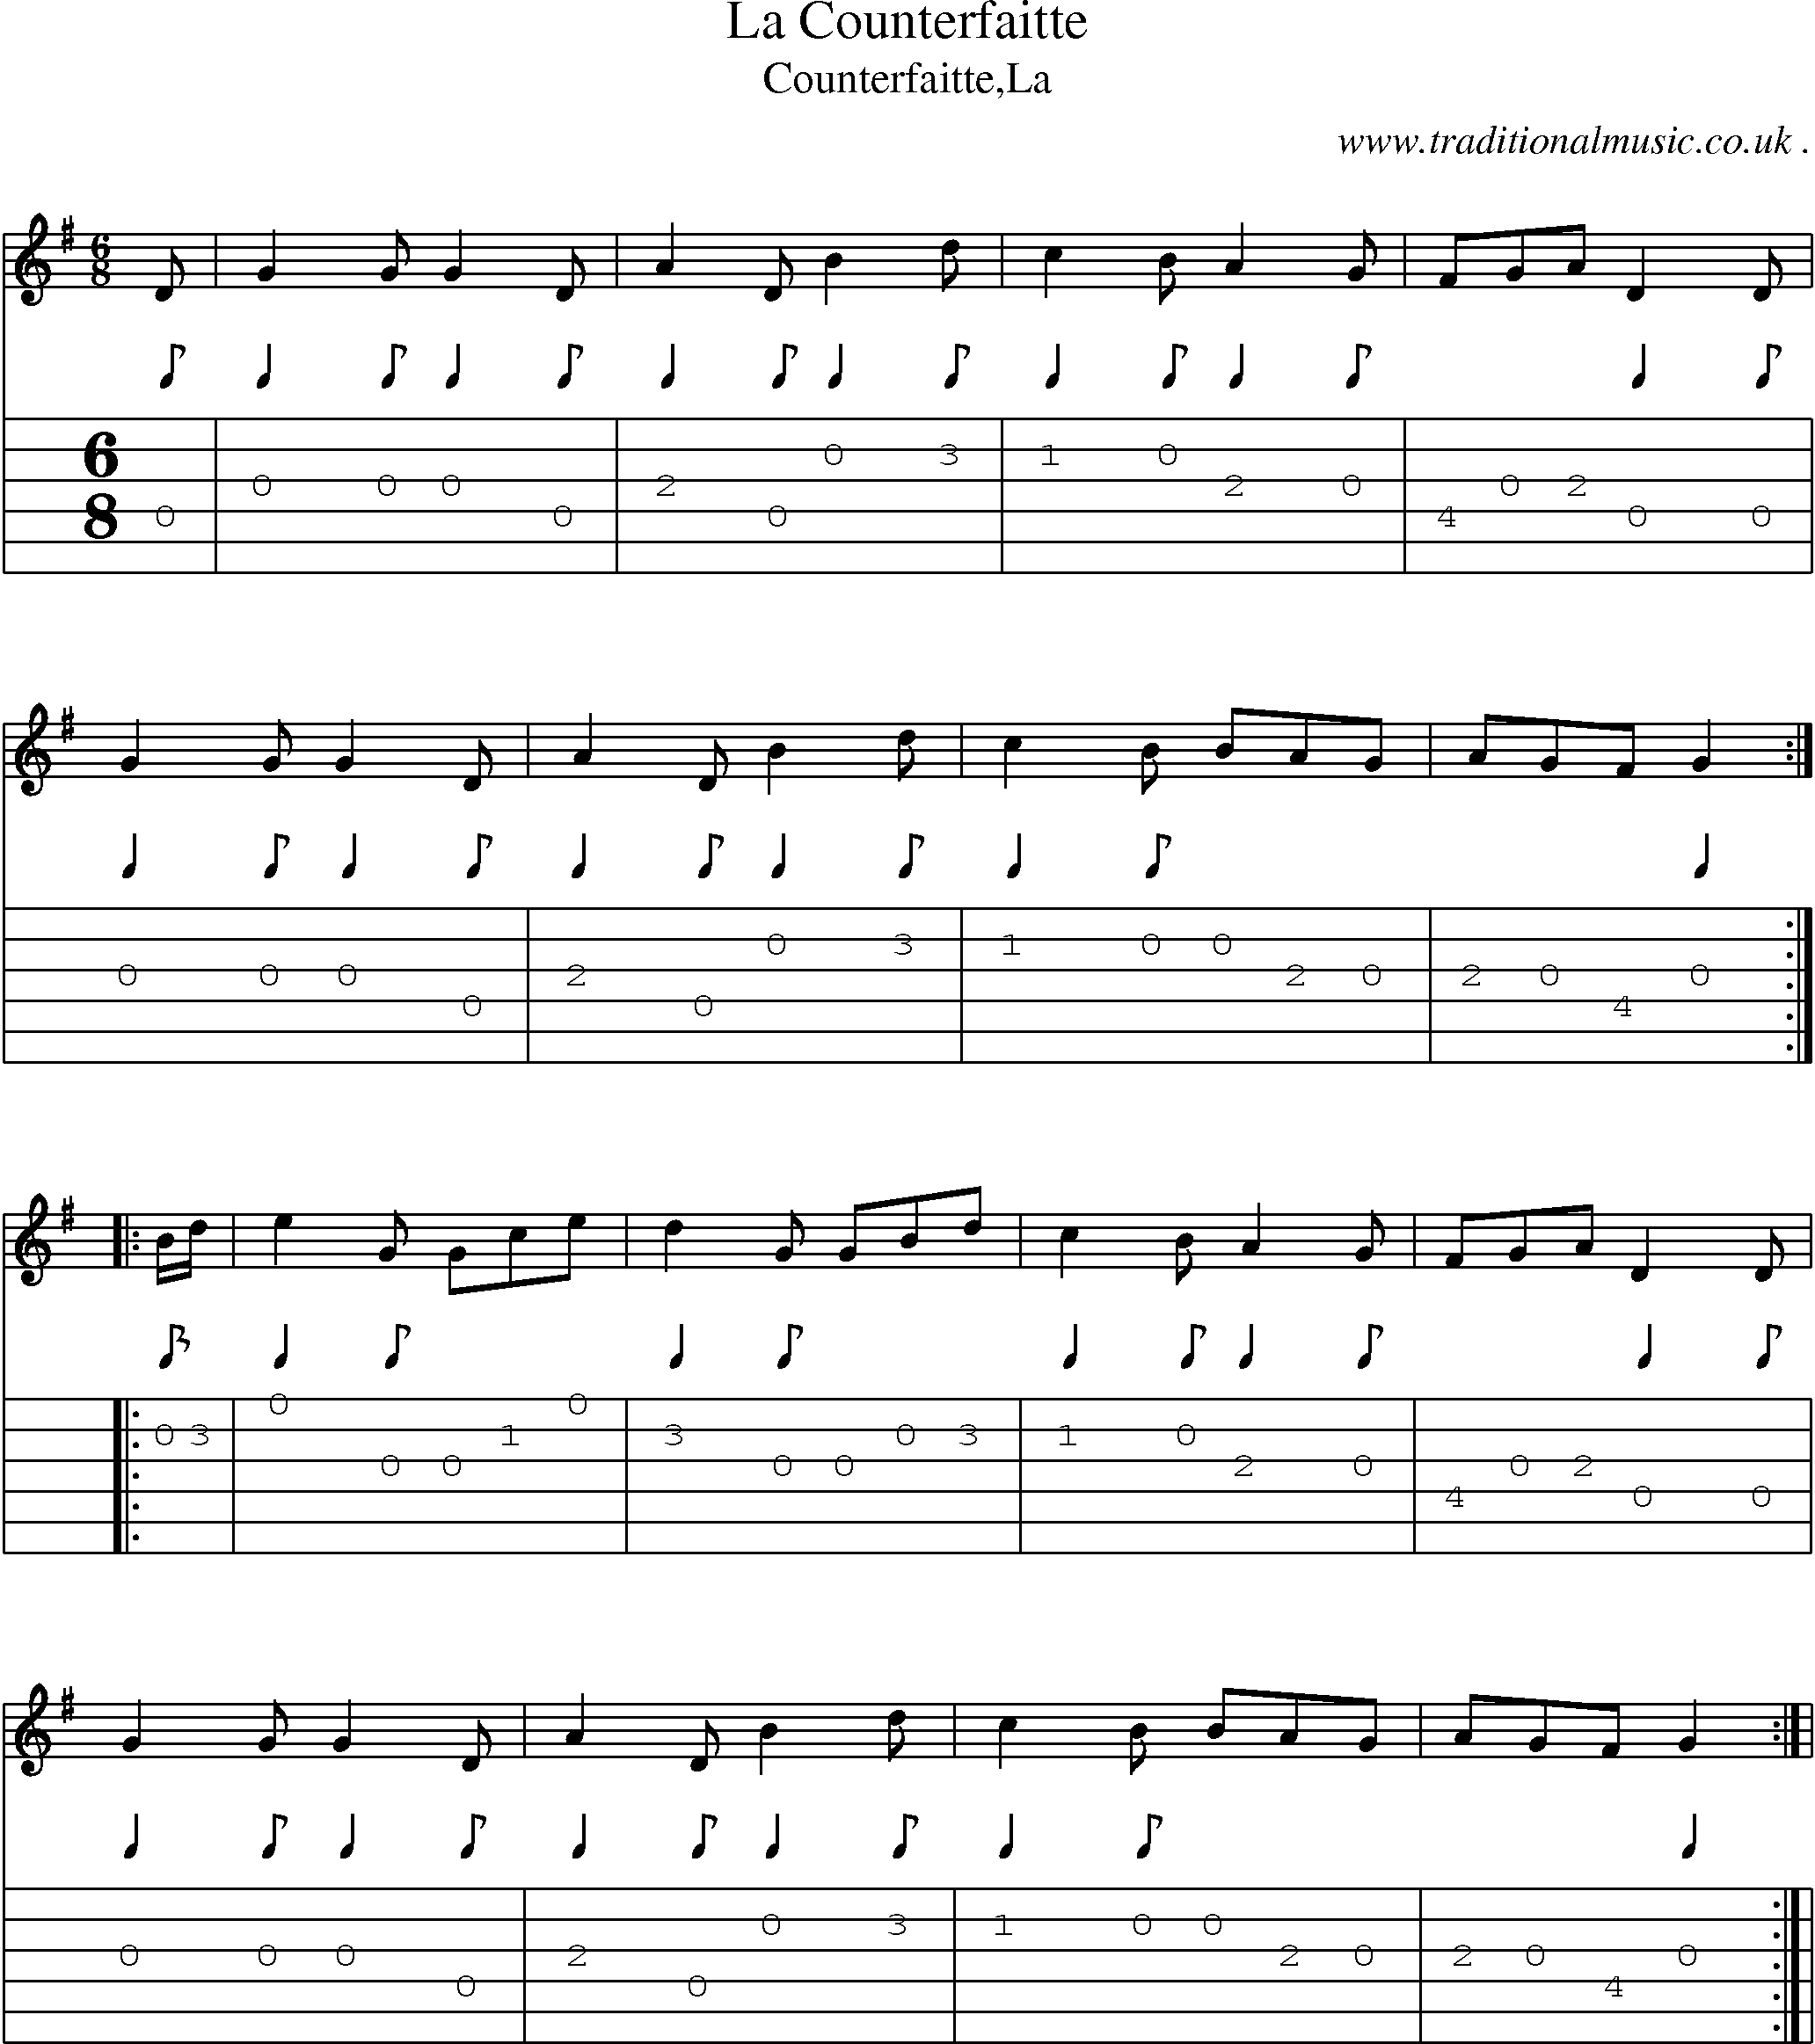 Sheet-Music and Guitar Tabs for La Counterfaitte